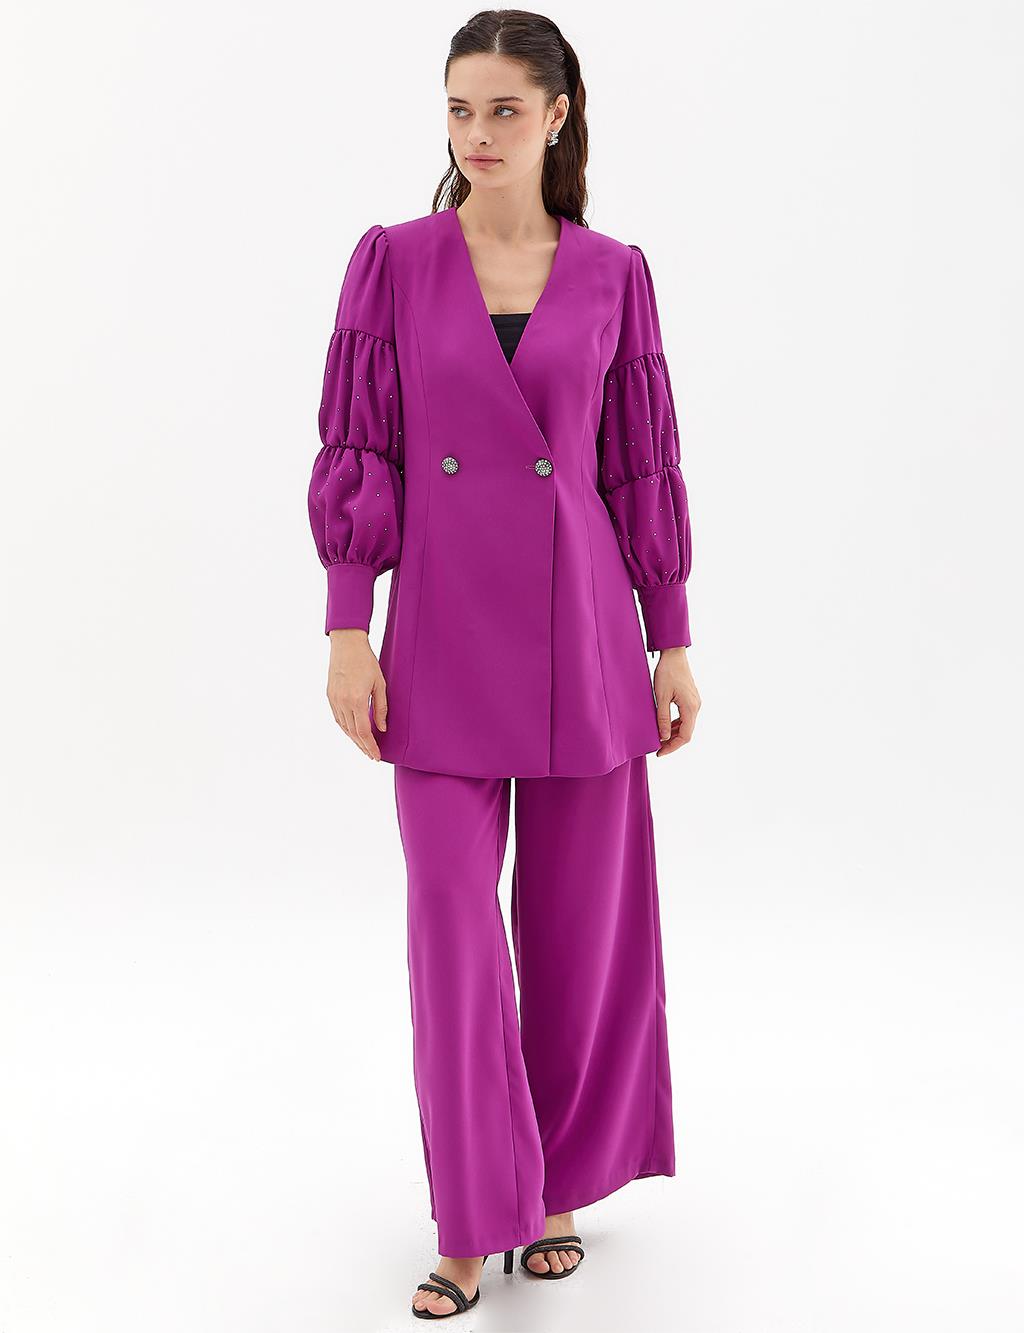 Watermelon Sleeve Double Breasted Buttoned Double Suit Purple